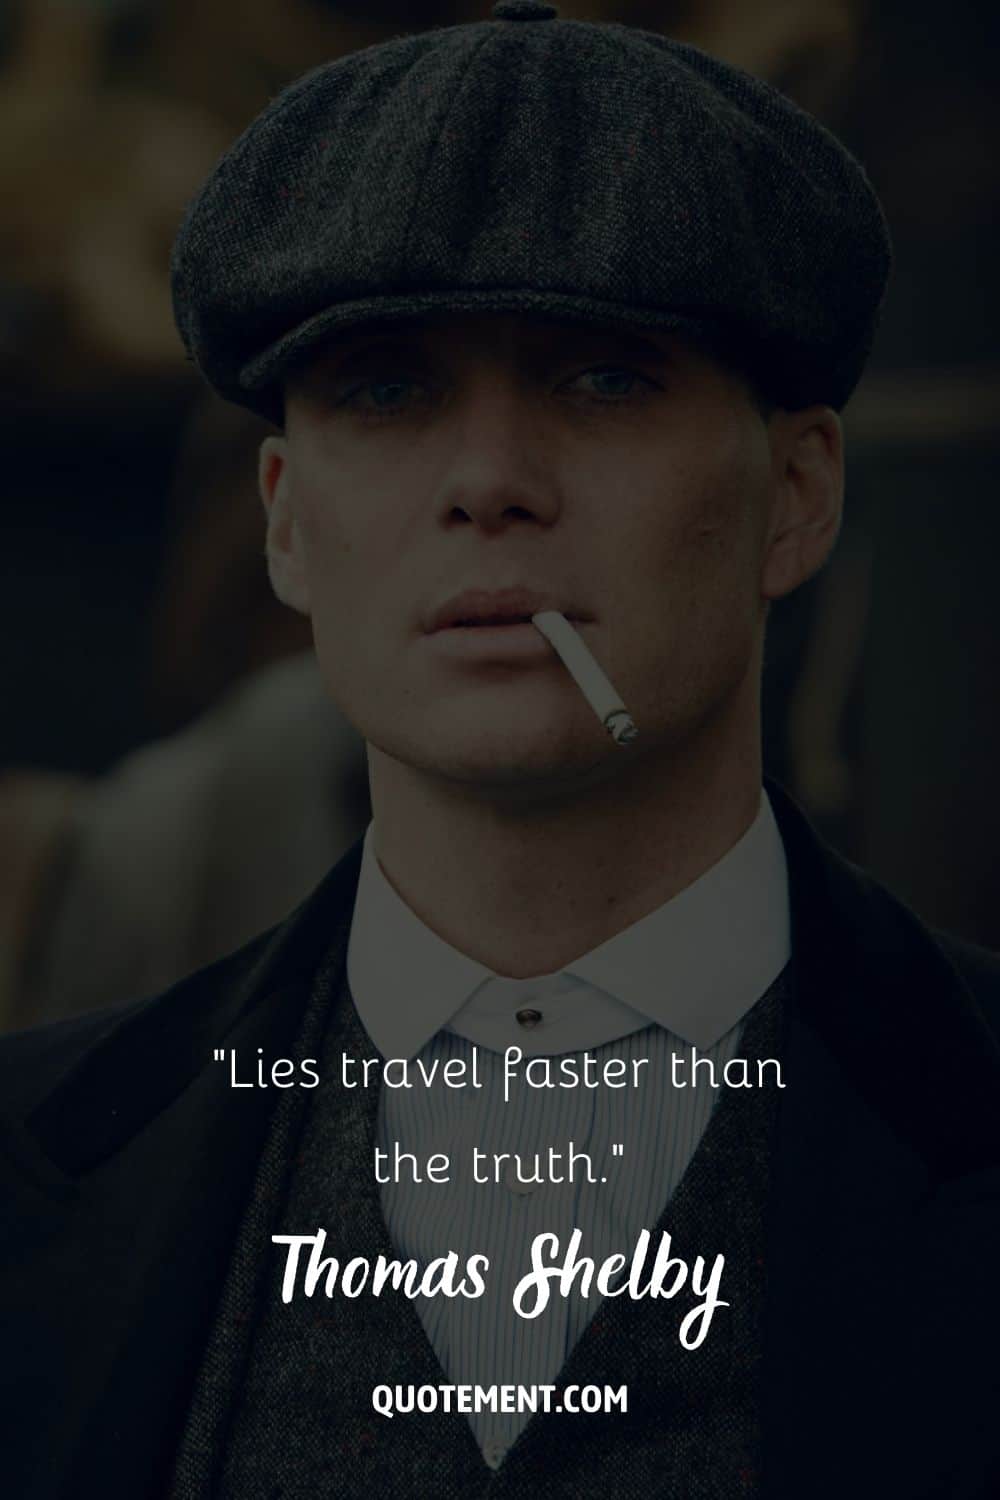 Cillian Murphy exudes allure with a cigarette representing shelby quote
